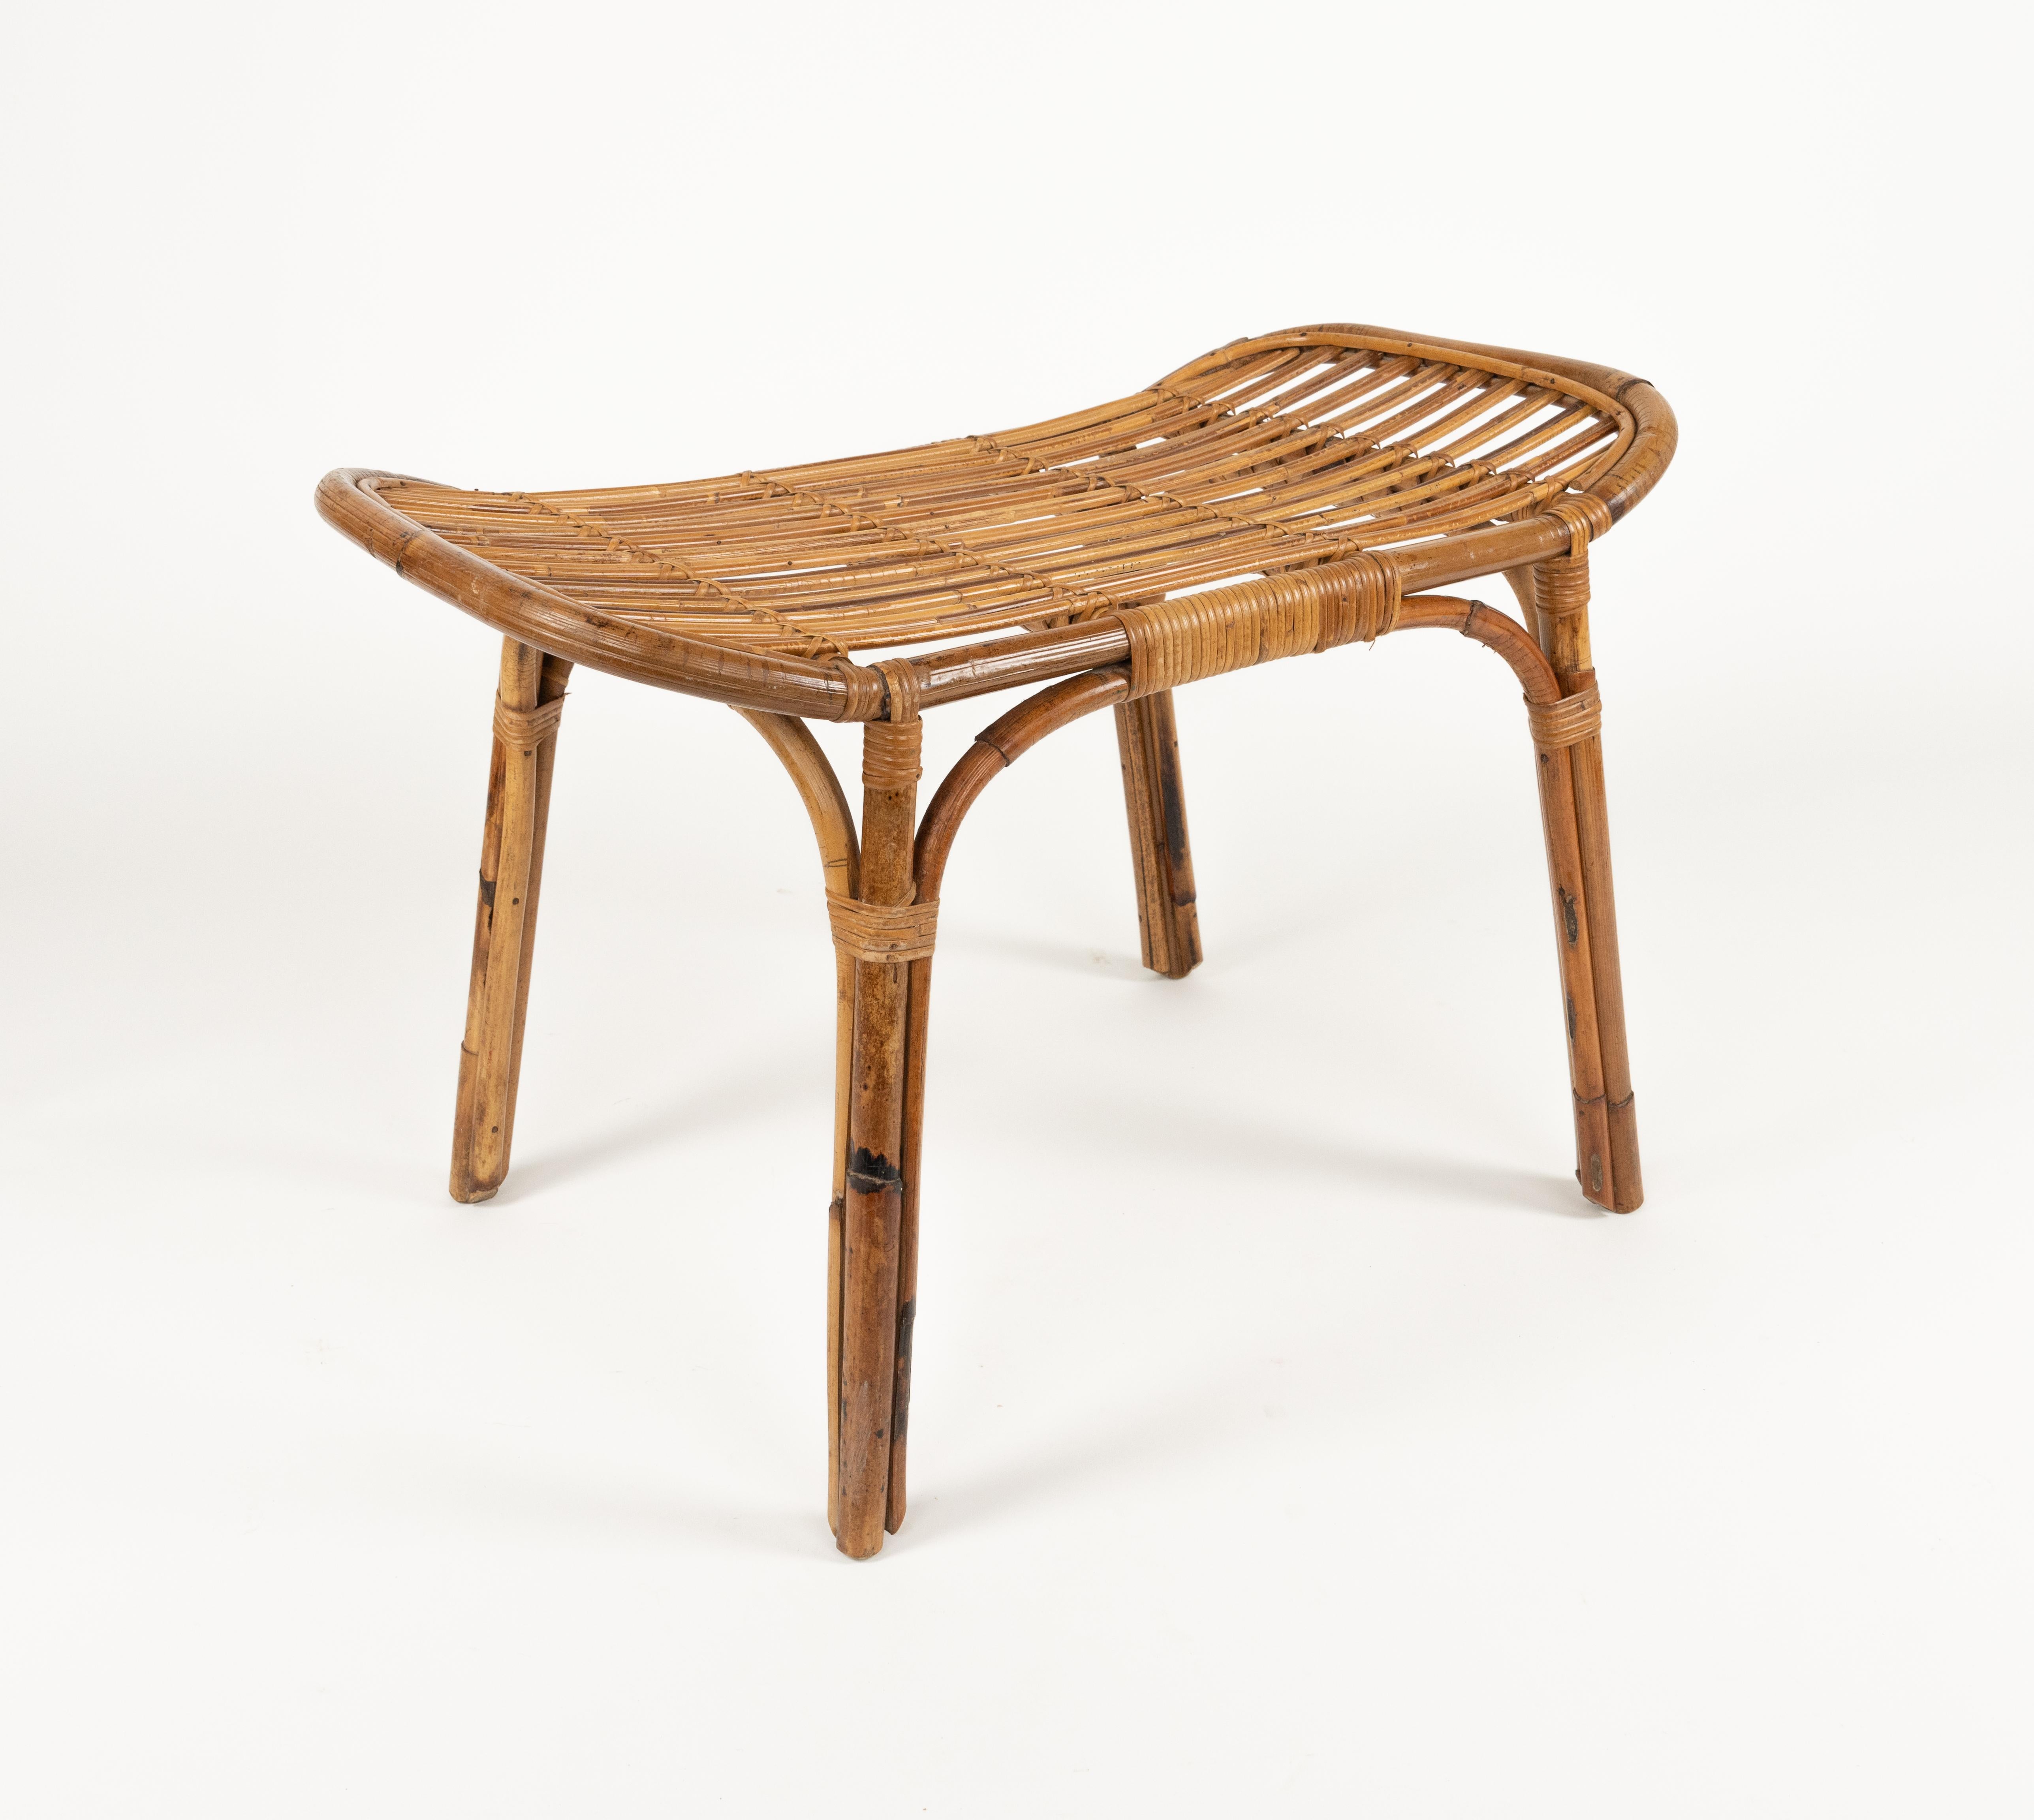 Midcentury Bench or Side Table in Rattan & Bamboo Tito Agnoli Style, Italy 1960s For Sale 3